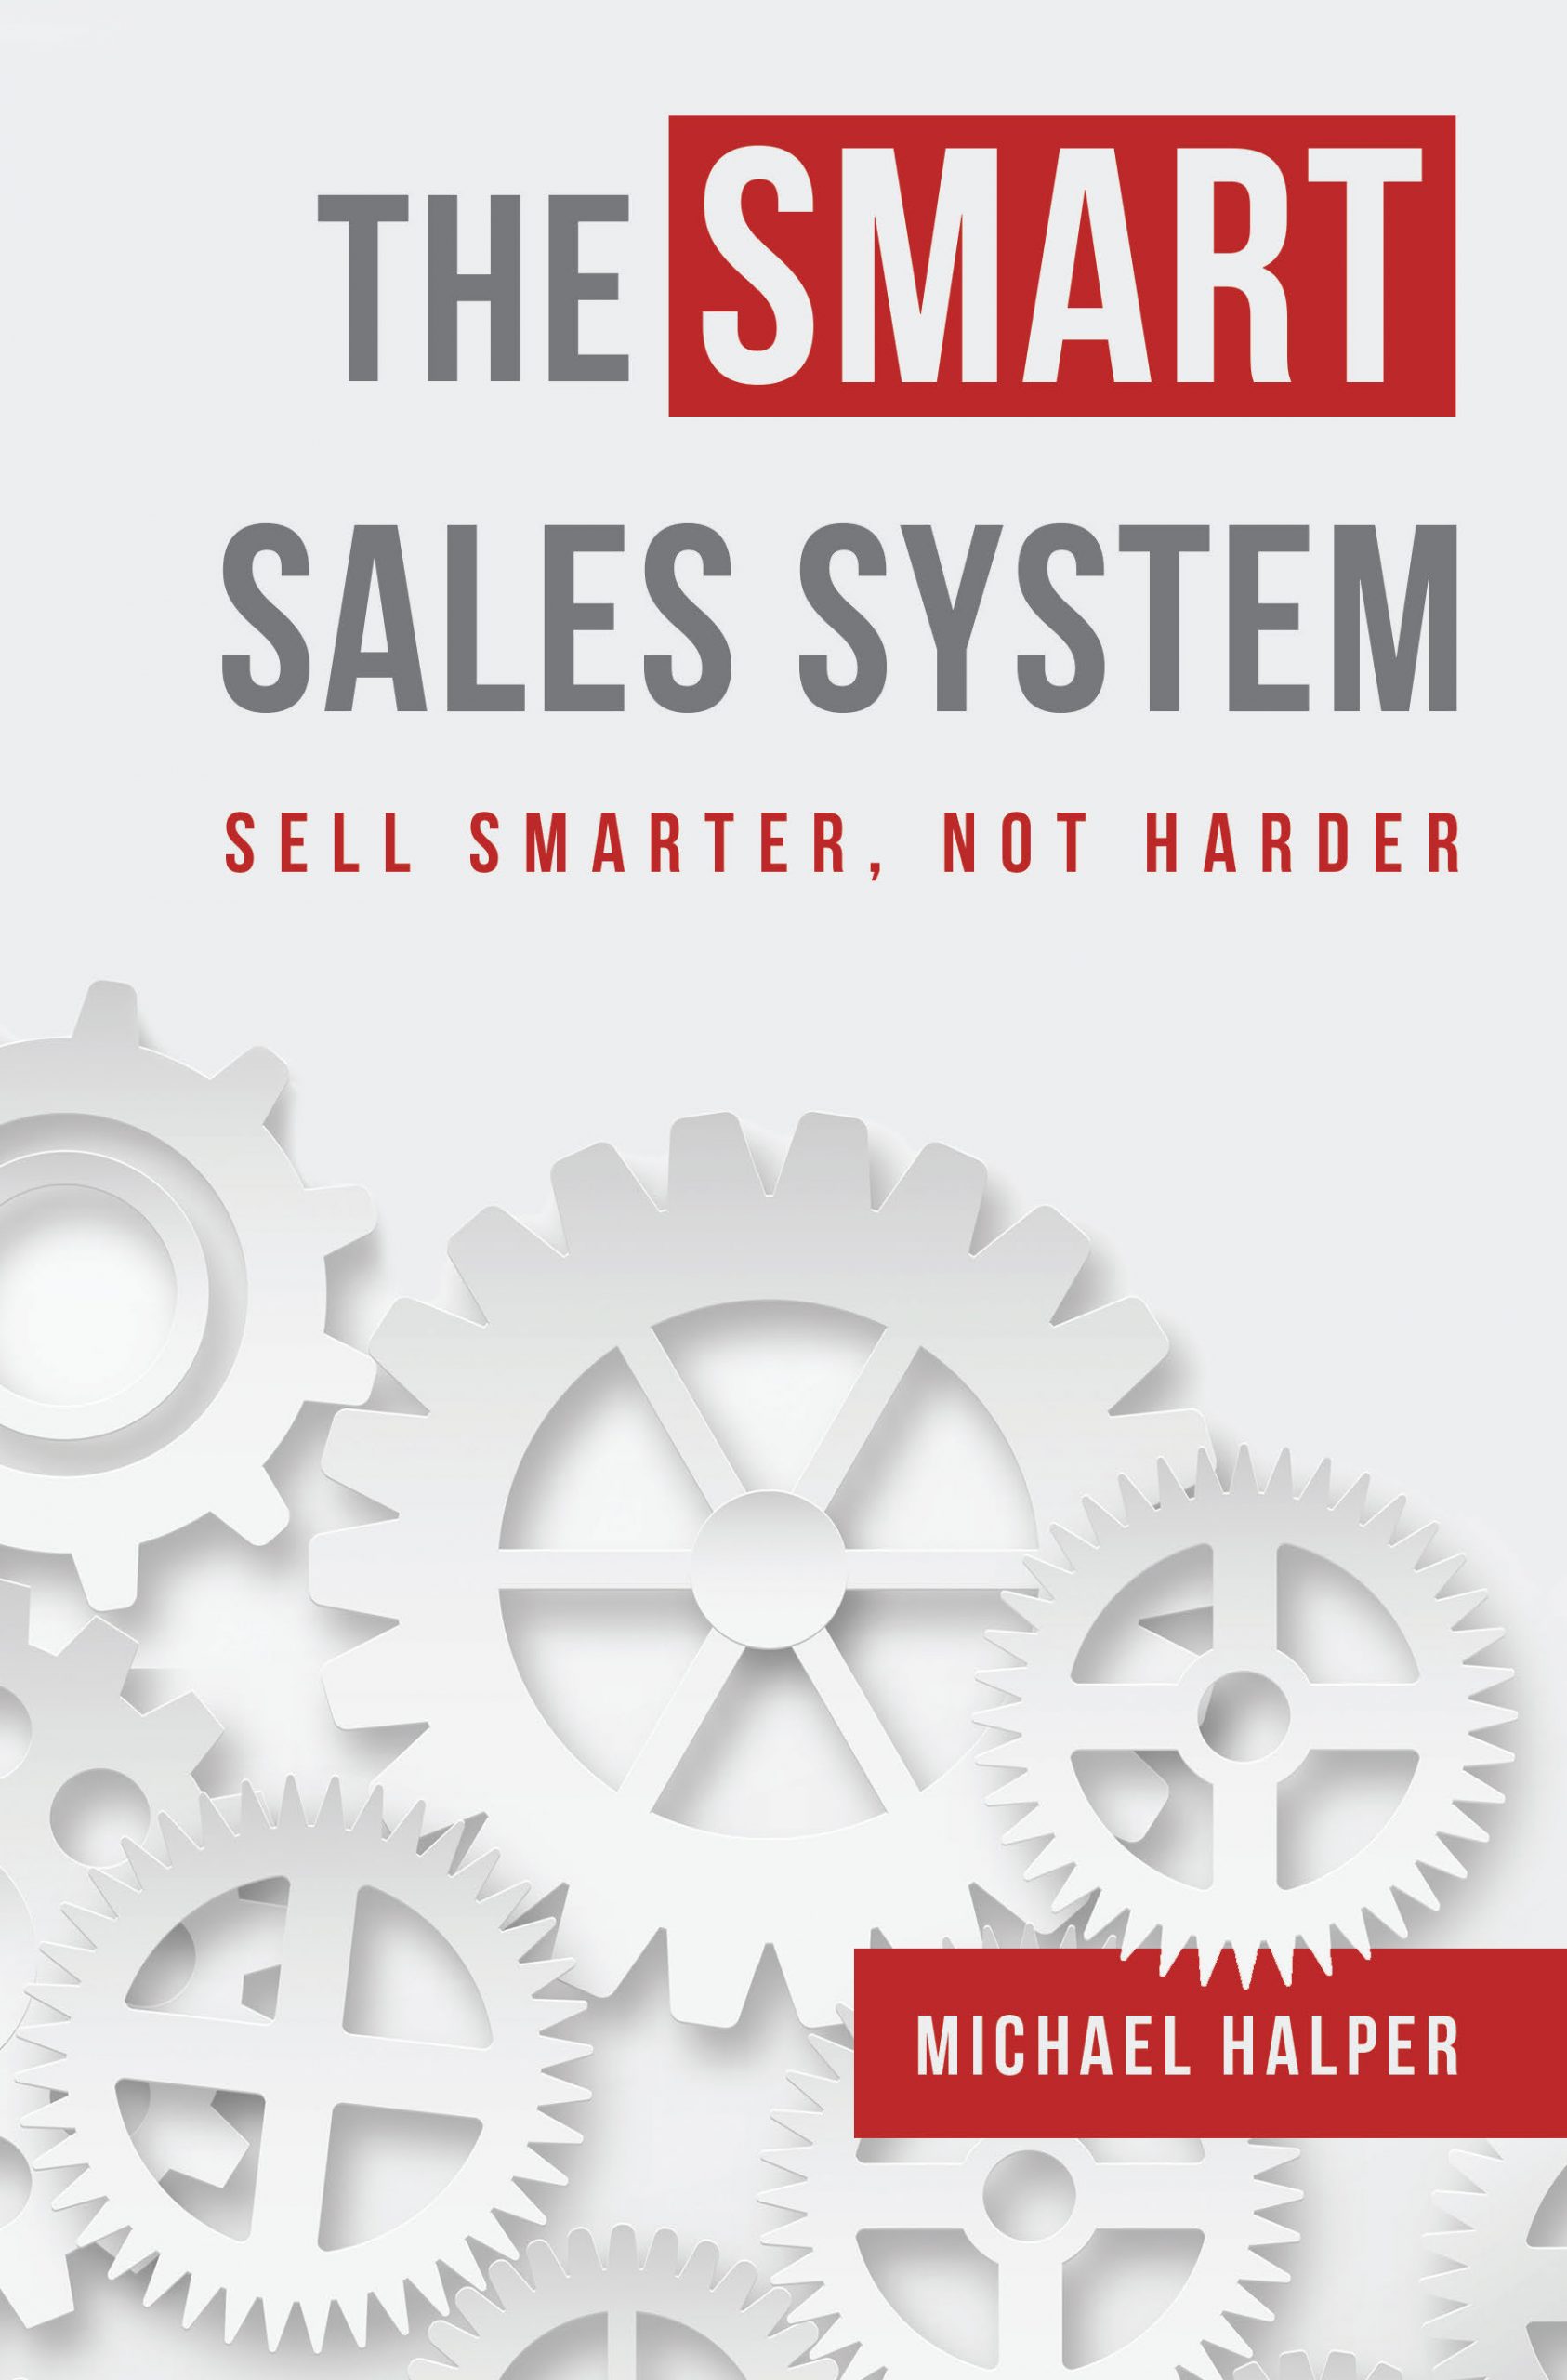 The SMART Sales System – SELL SMARTER, NOT HARDER (Book)